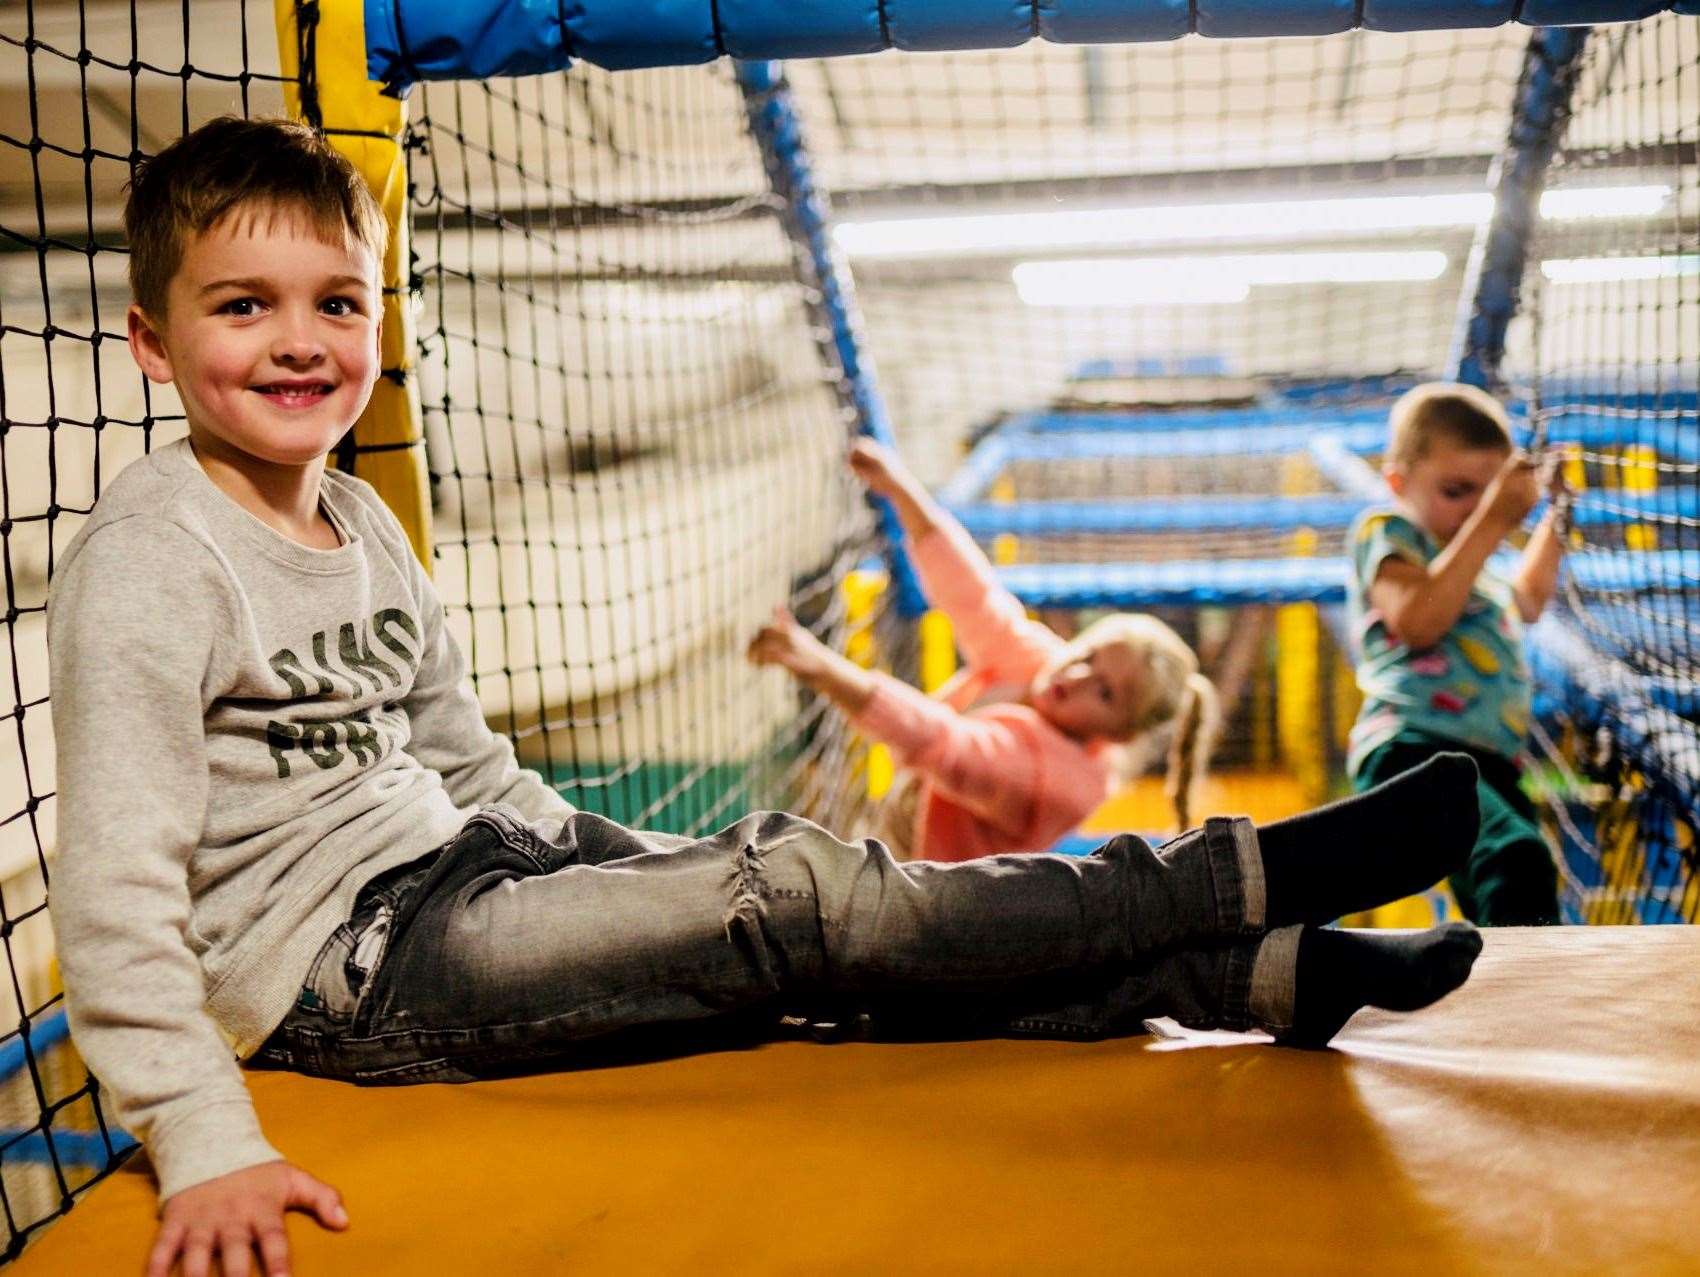 The soft play area and slides at Under 1 Roof Kids Thanet. Picture: James Pearce